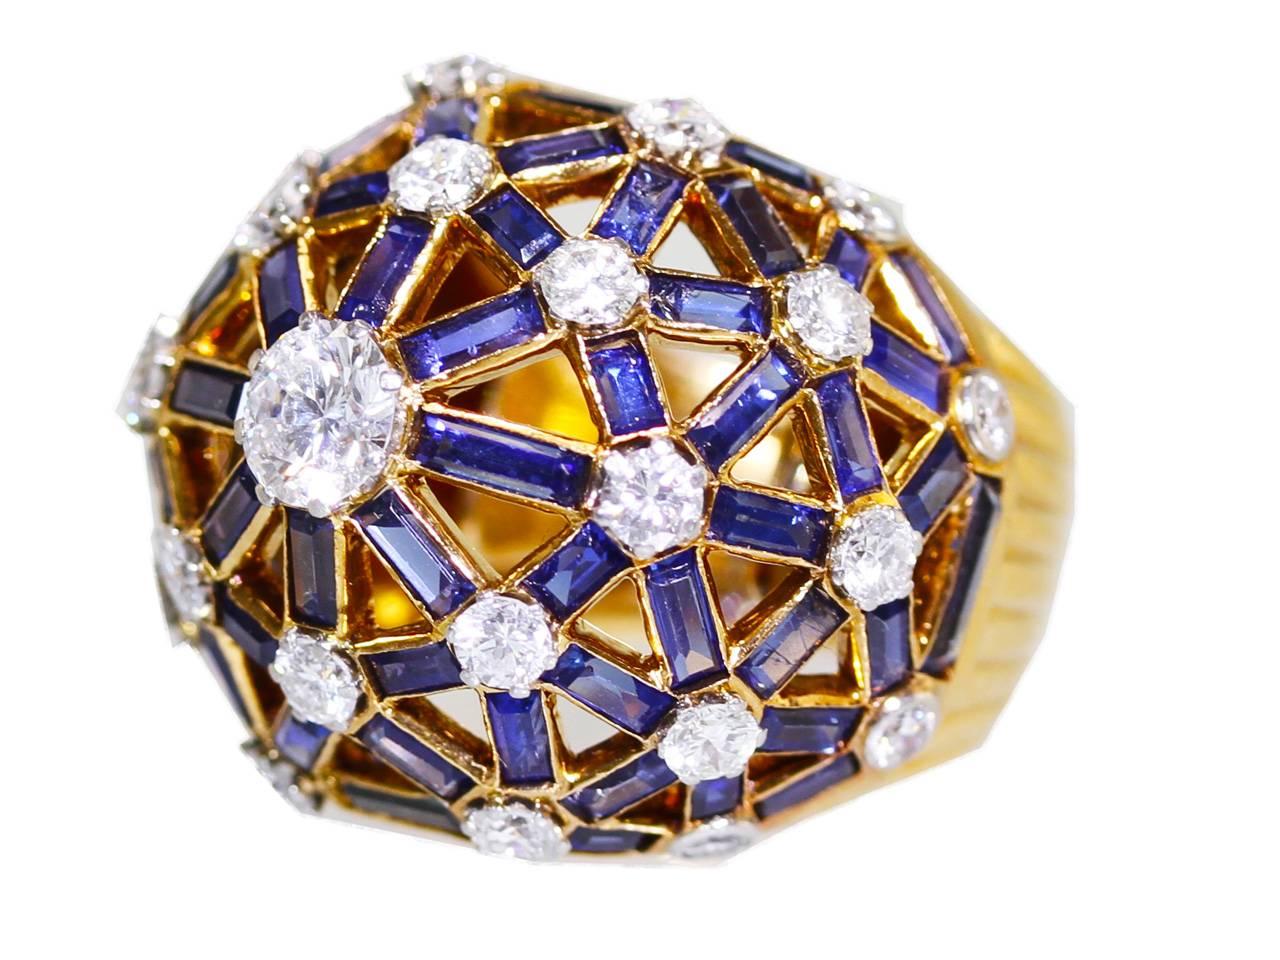 18 it. Gold, sapphire, and diamond ring by Mellerio, Paris, circa 1960. Diamond weigh approximately 2.25 carats, and sapphire weight approximately 5.00 carats. Signed Mellerio, Paris and numbered 390.11, with French assay marks.